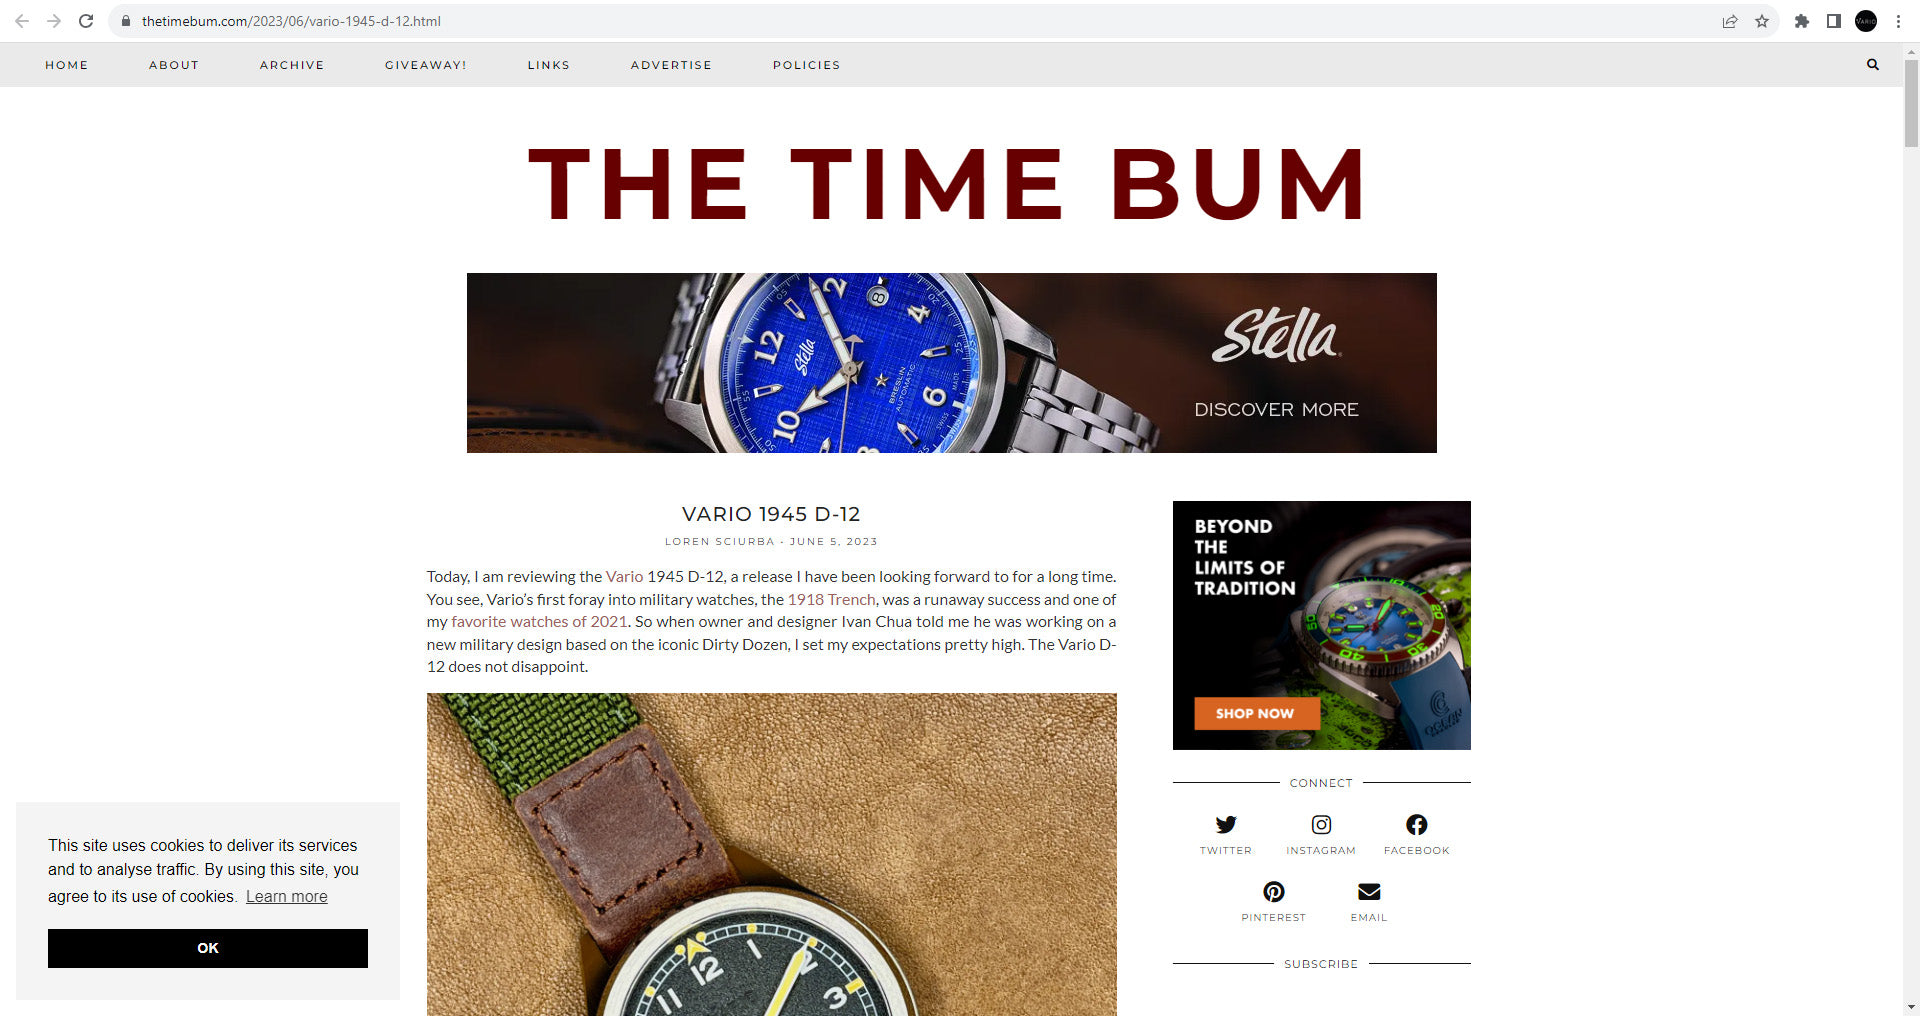 Vario 1945 D12 Field Watch featured on The Time Bum